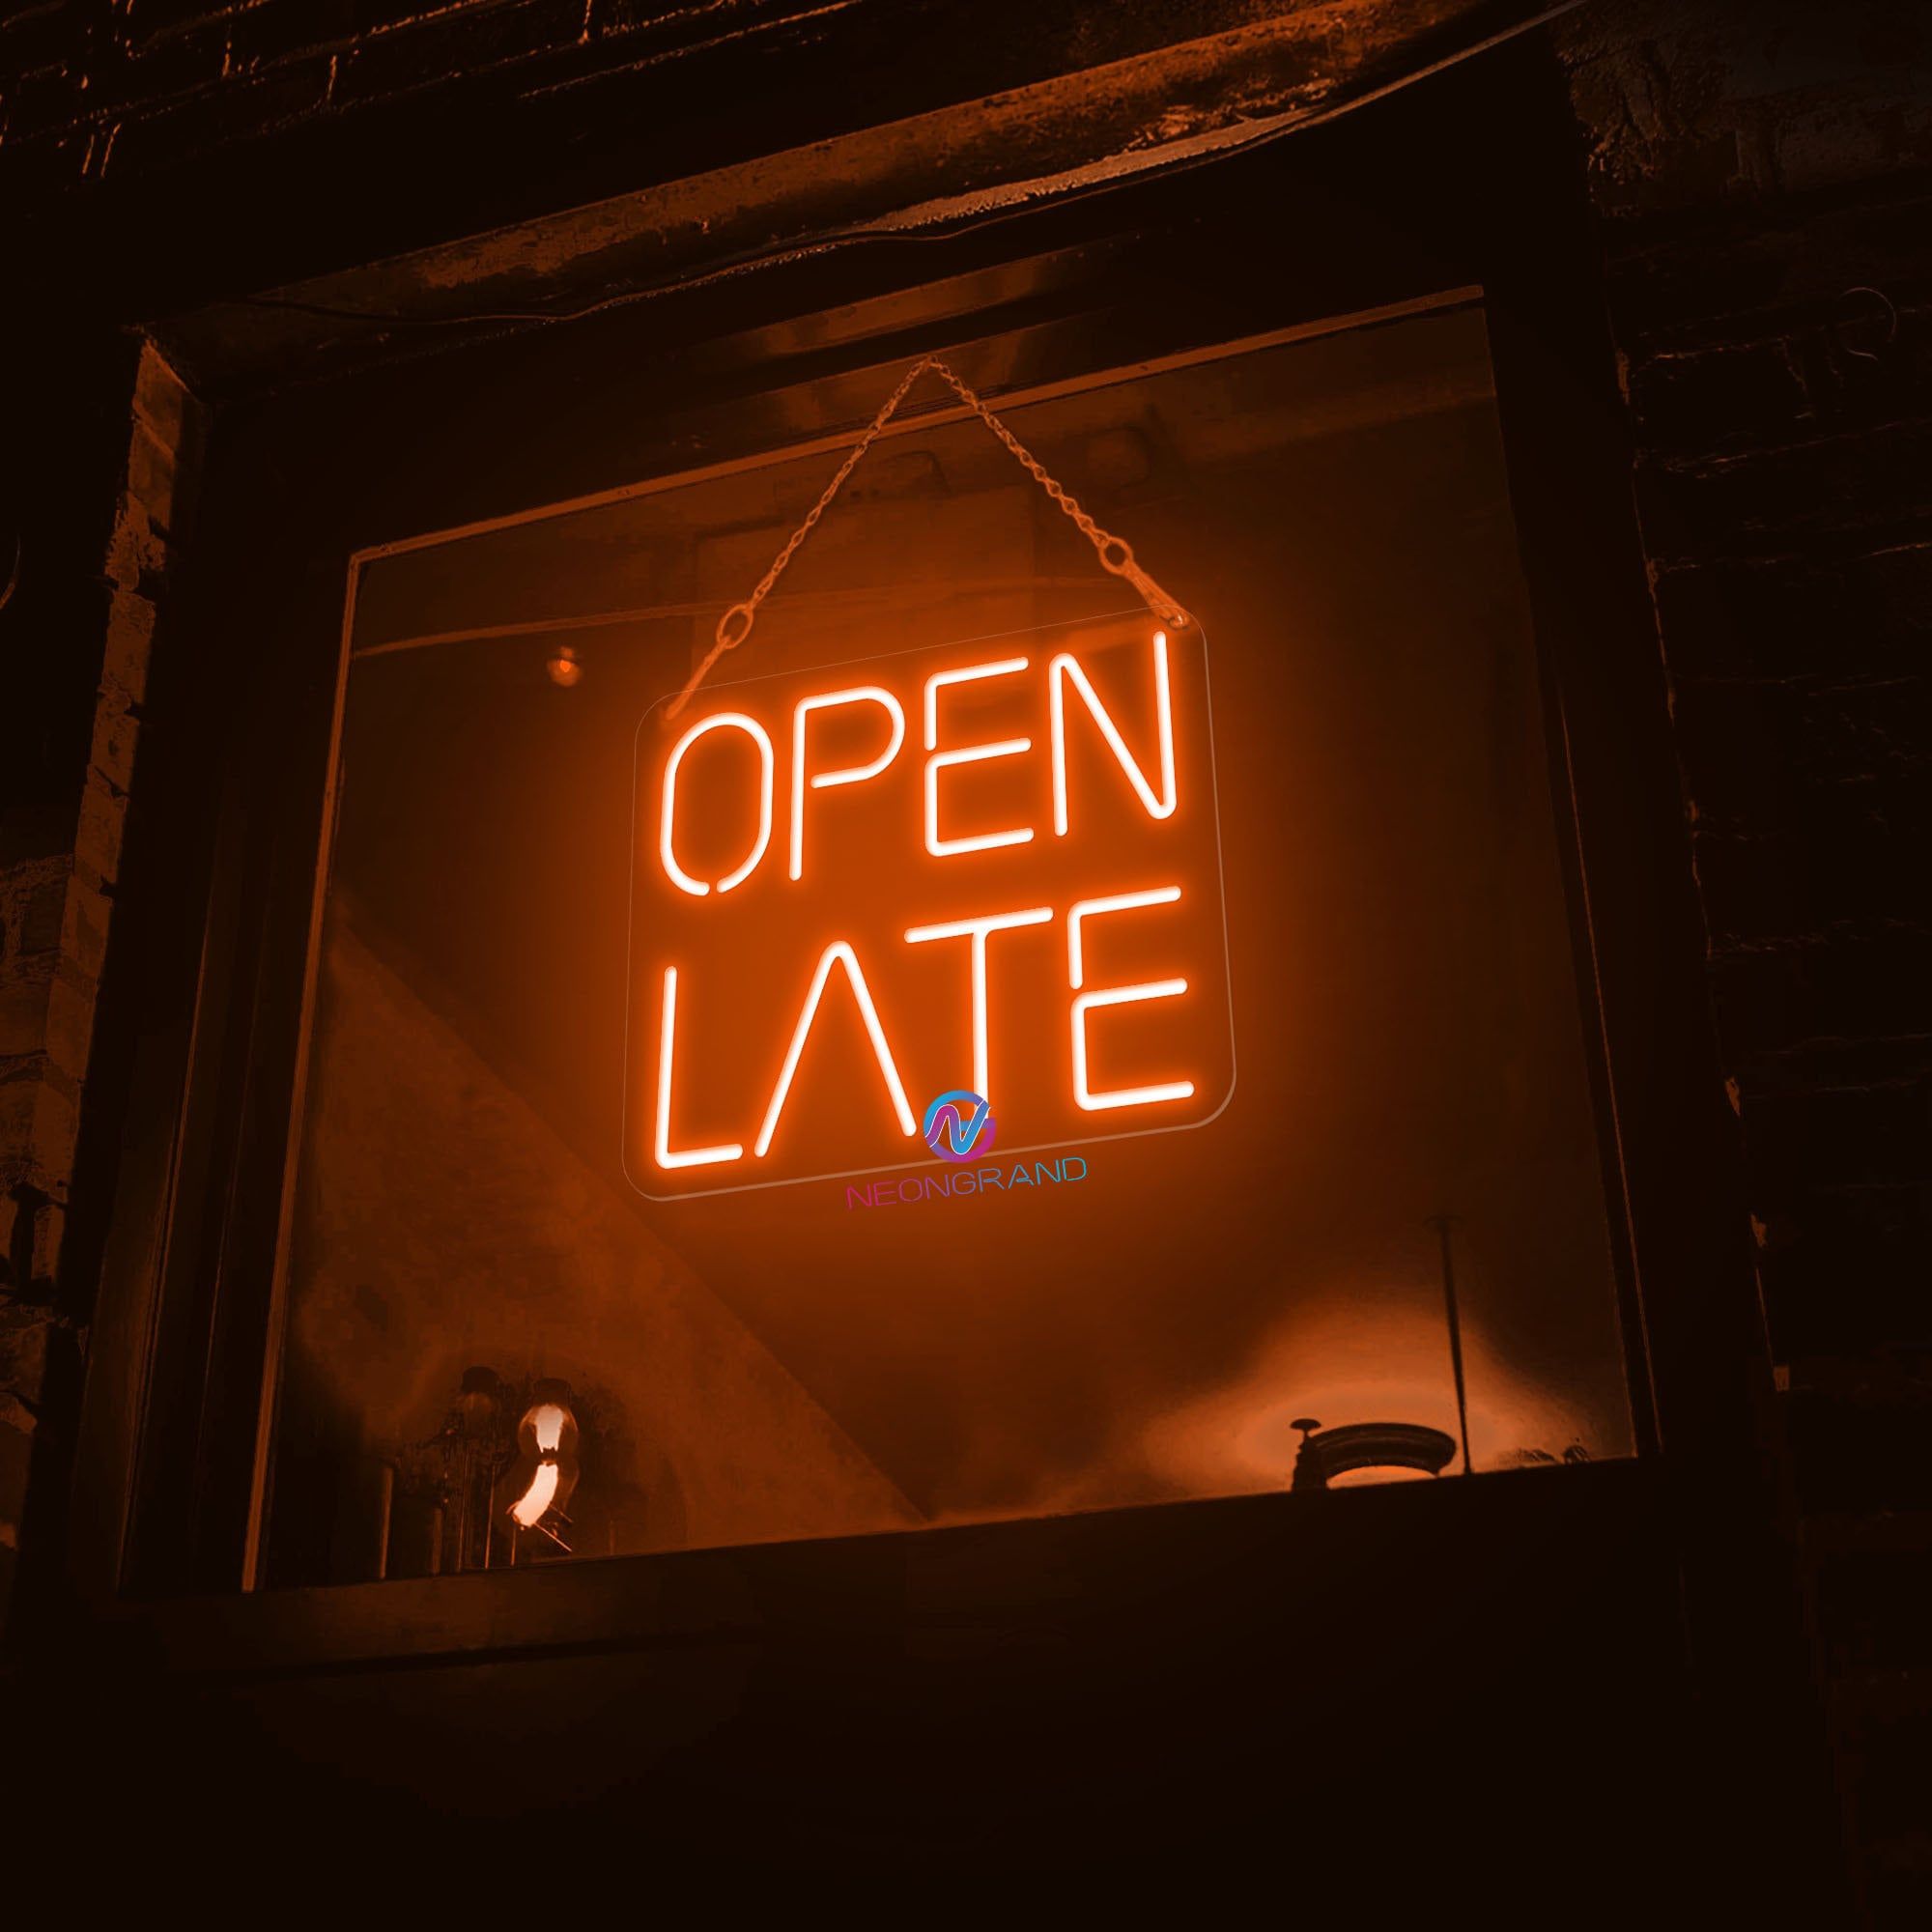 A neon sign that says open late - Neon orange